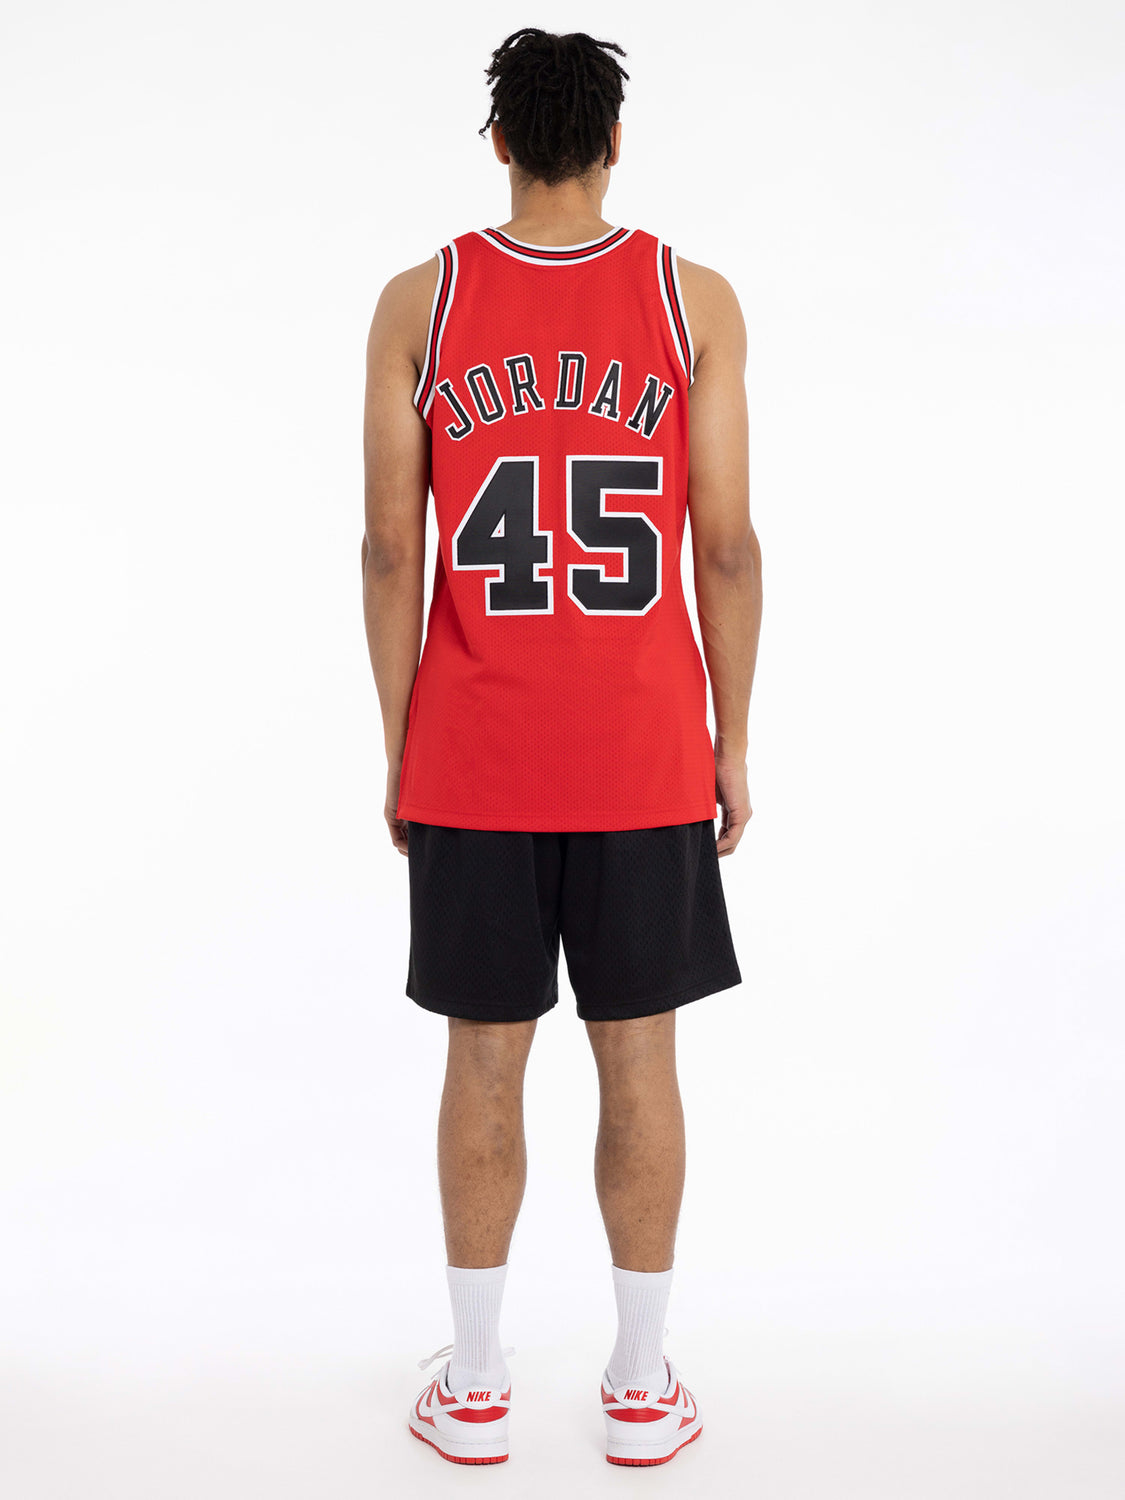 Mitchell & Ness Releases Limited Edition 1994 - 95 Michael Jordan